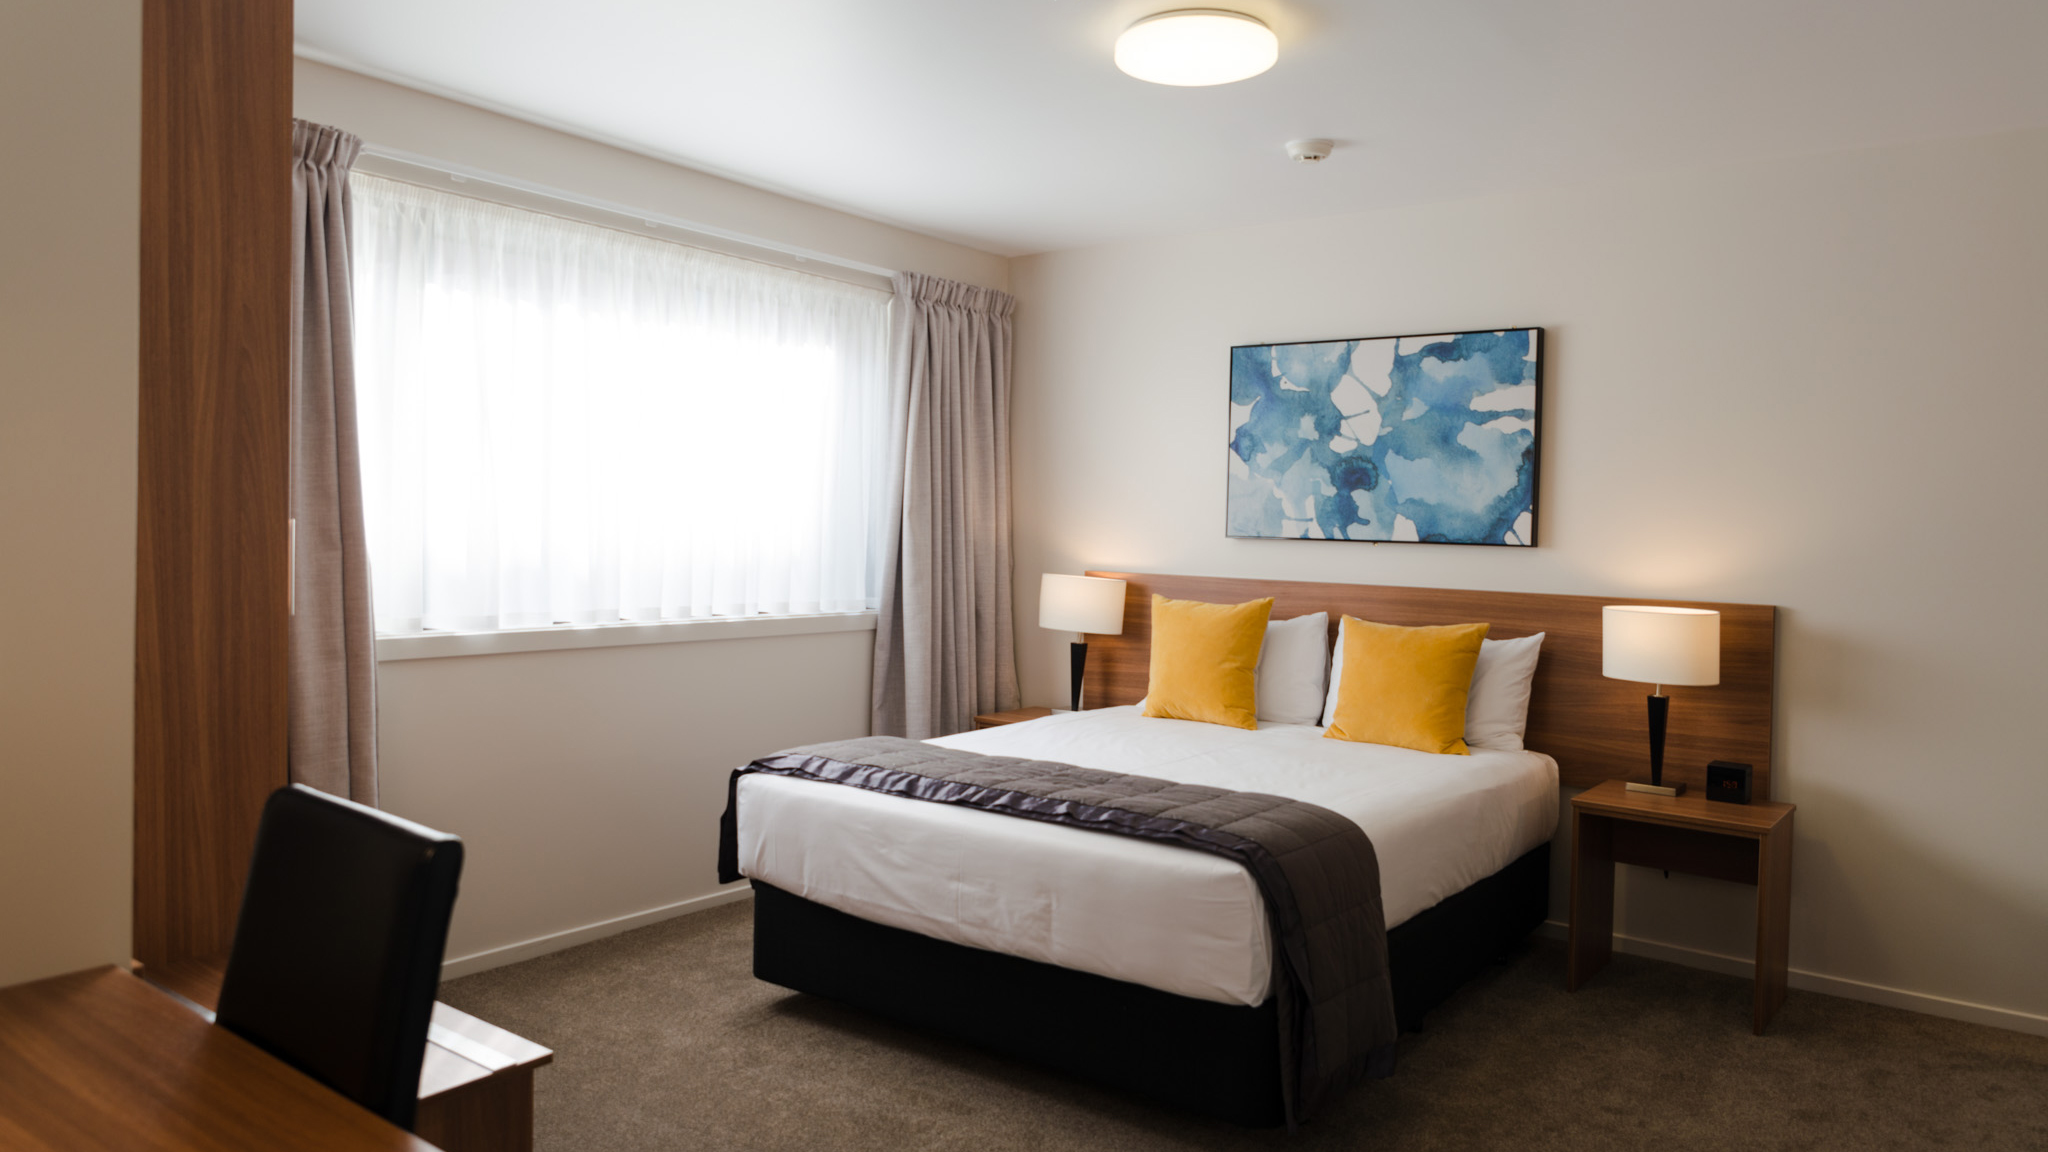 Interior Designers complete modern design for local hotel thumbnail